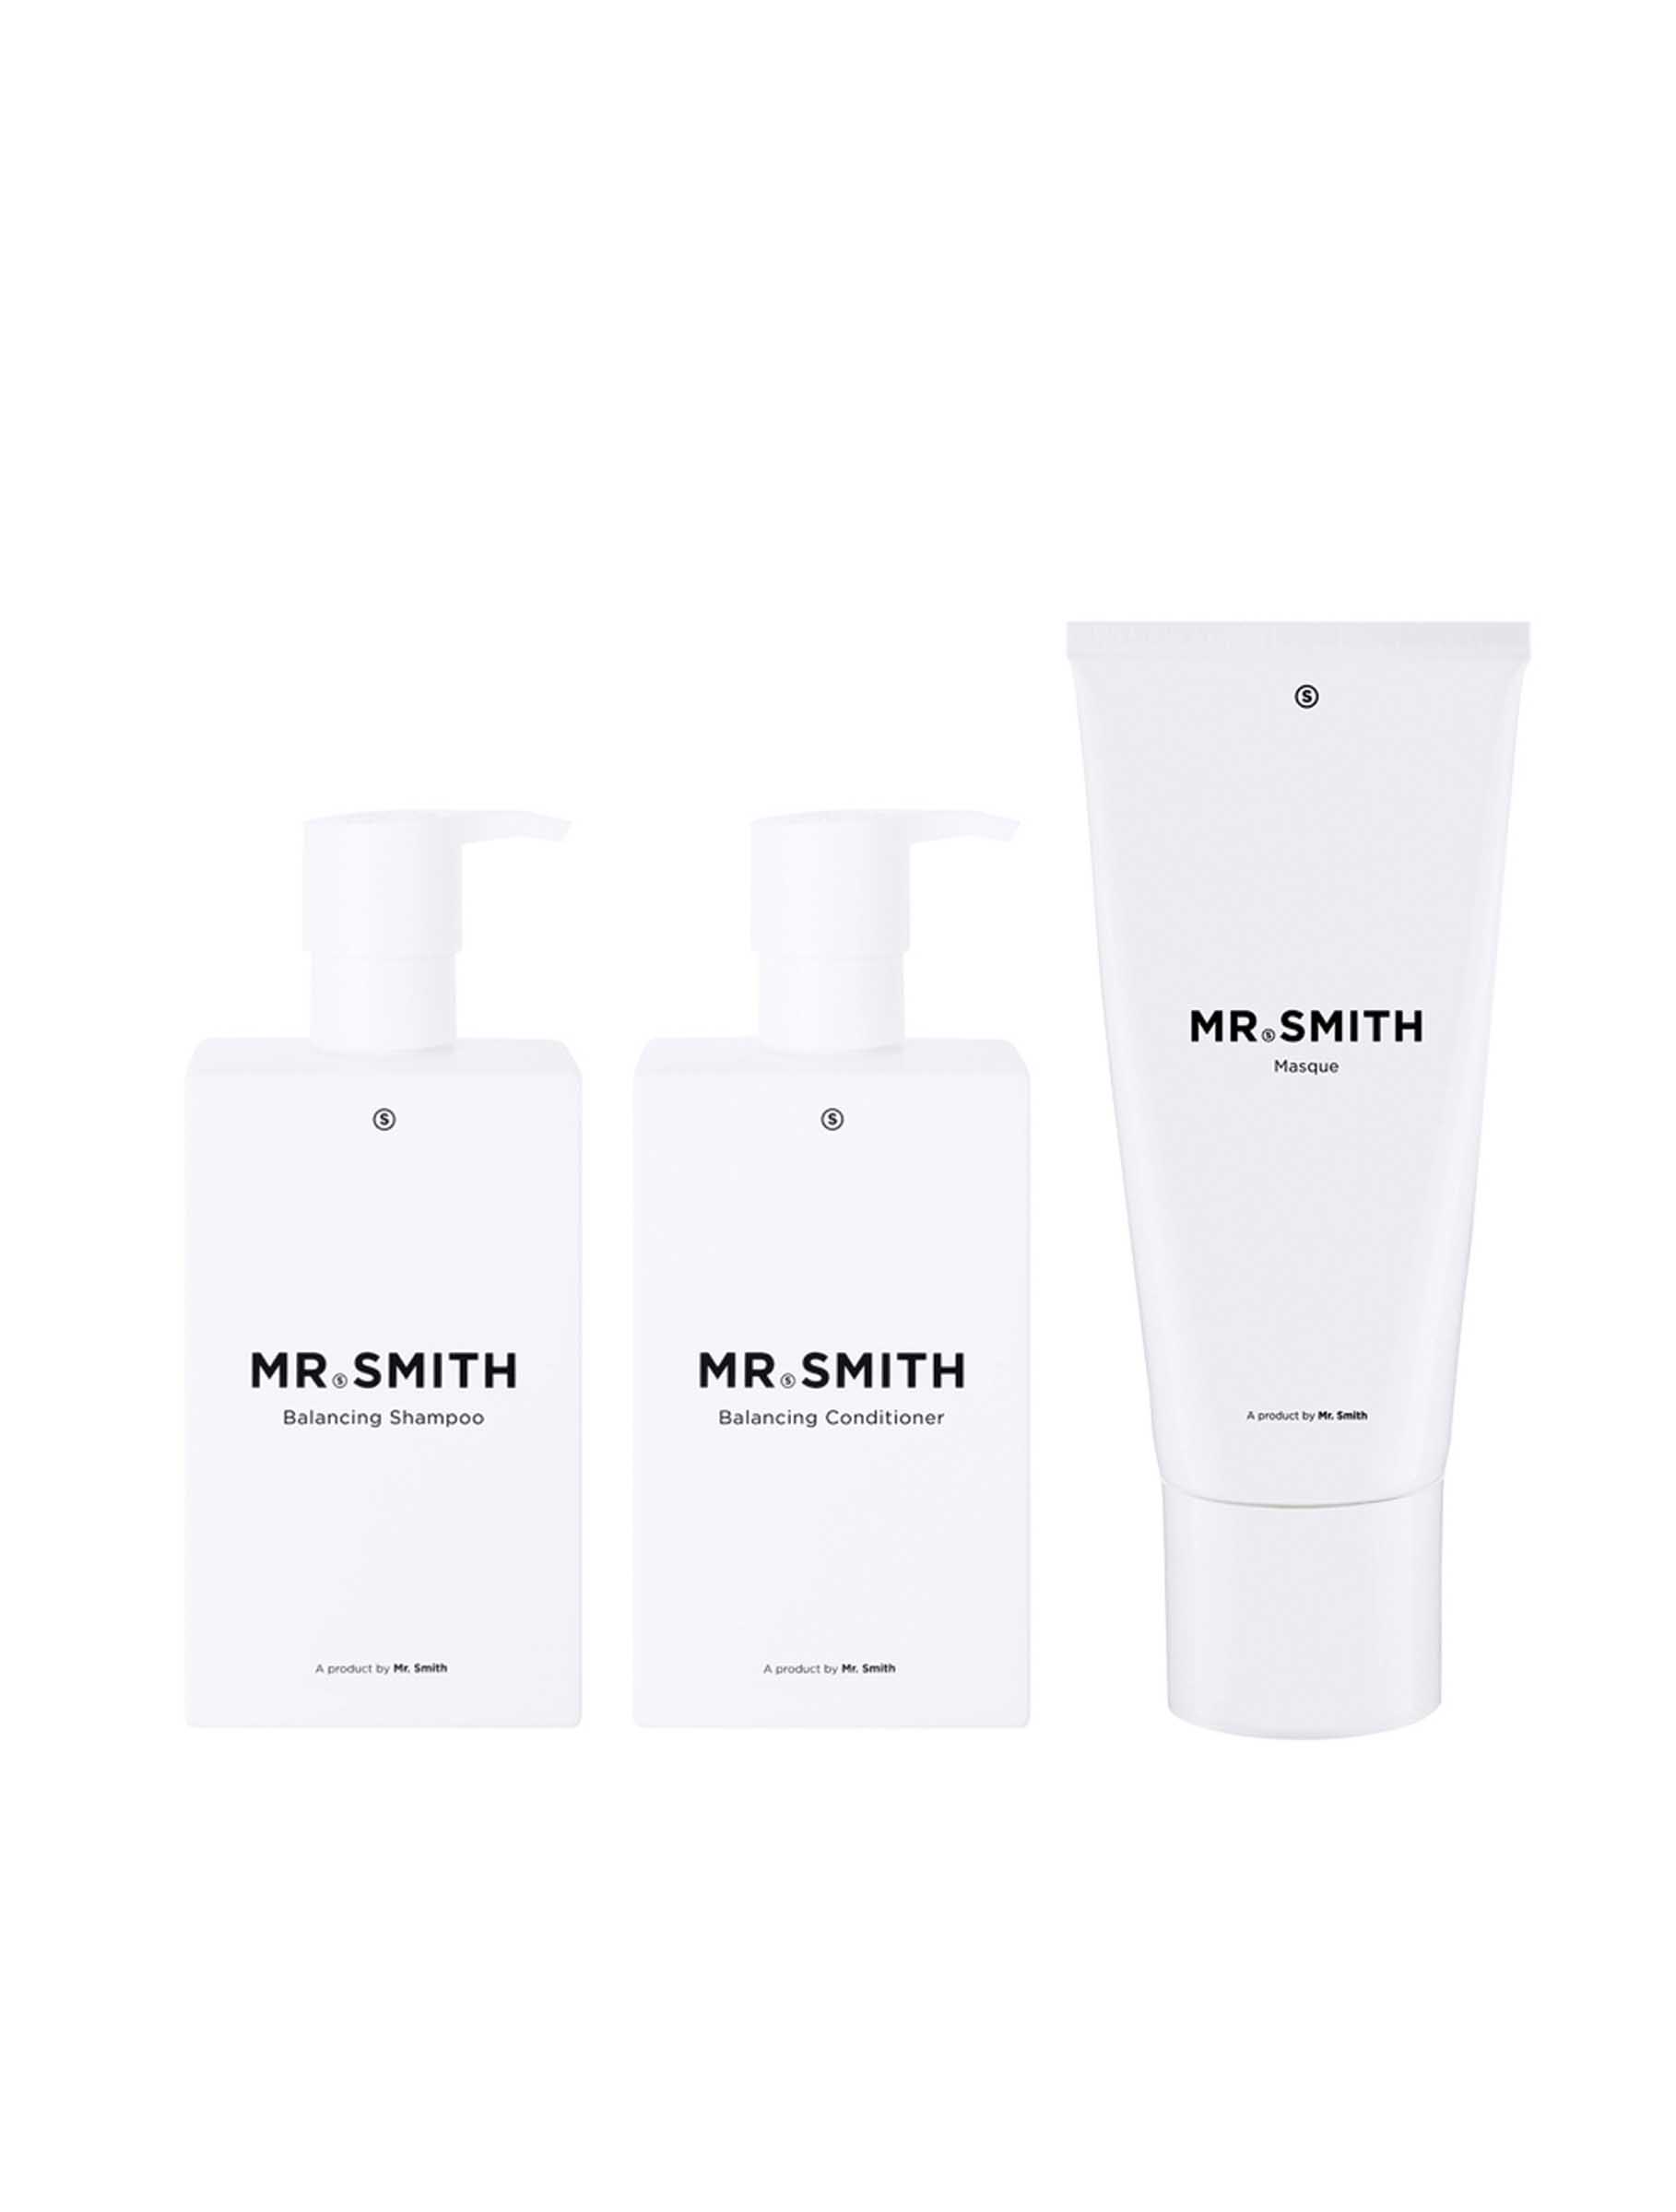 Mr. Smith Balancing Shampoo + Conditioner + Complimentary Masque Pack +  Tote Bag | Organic Strands Salon